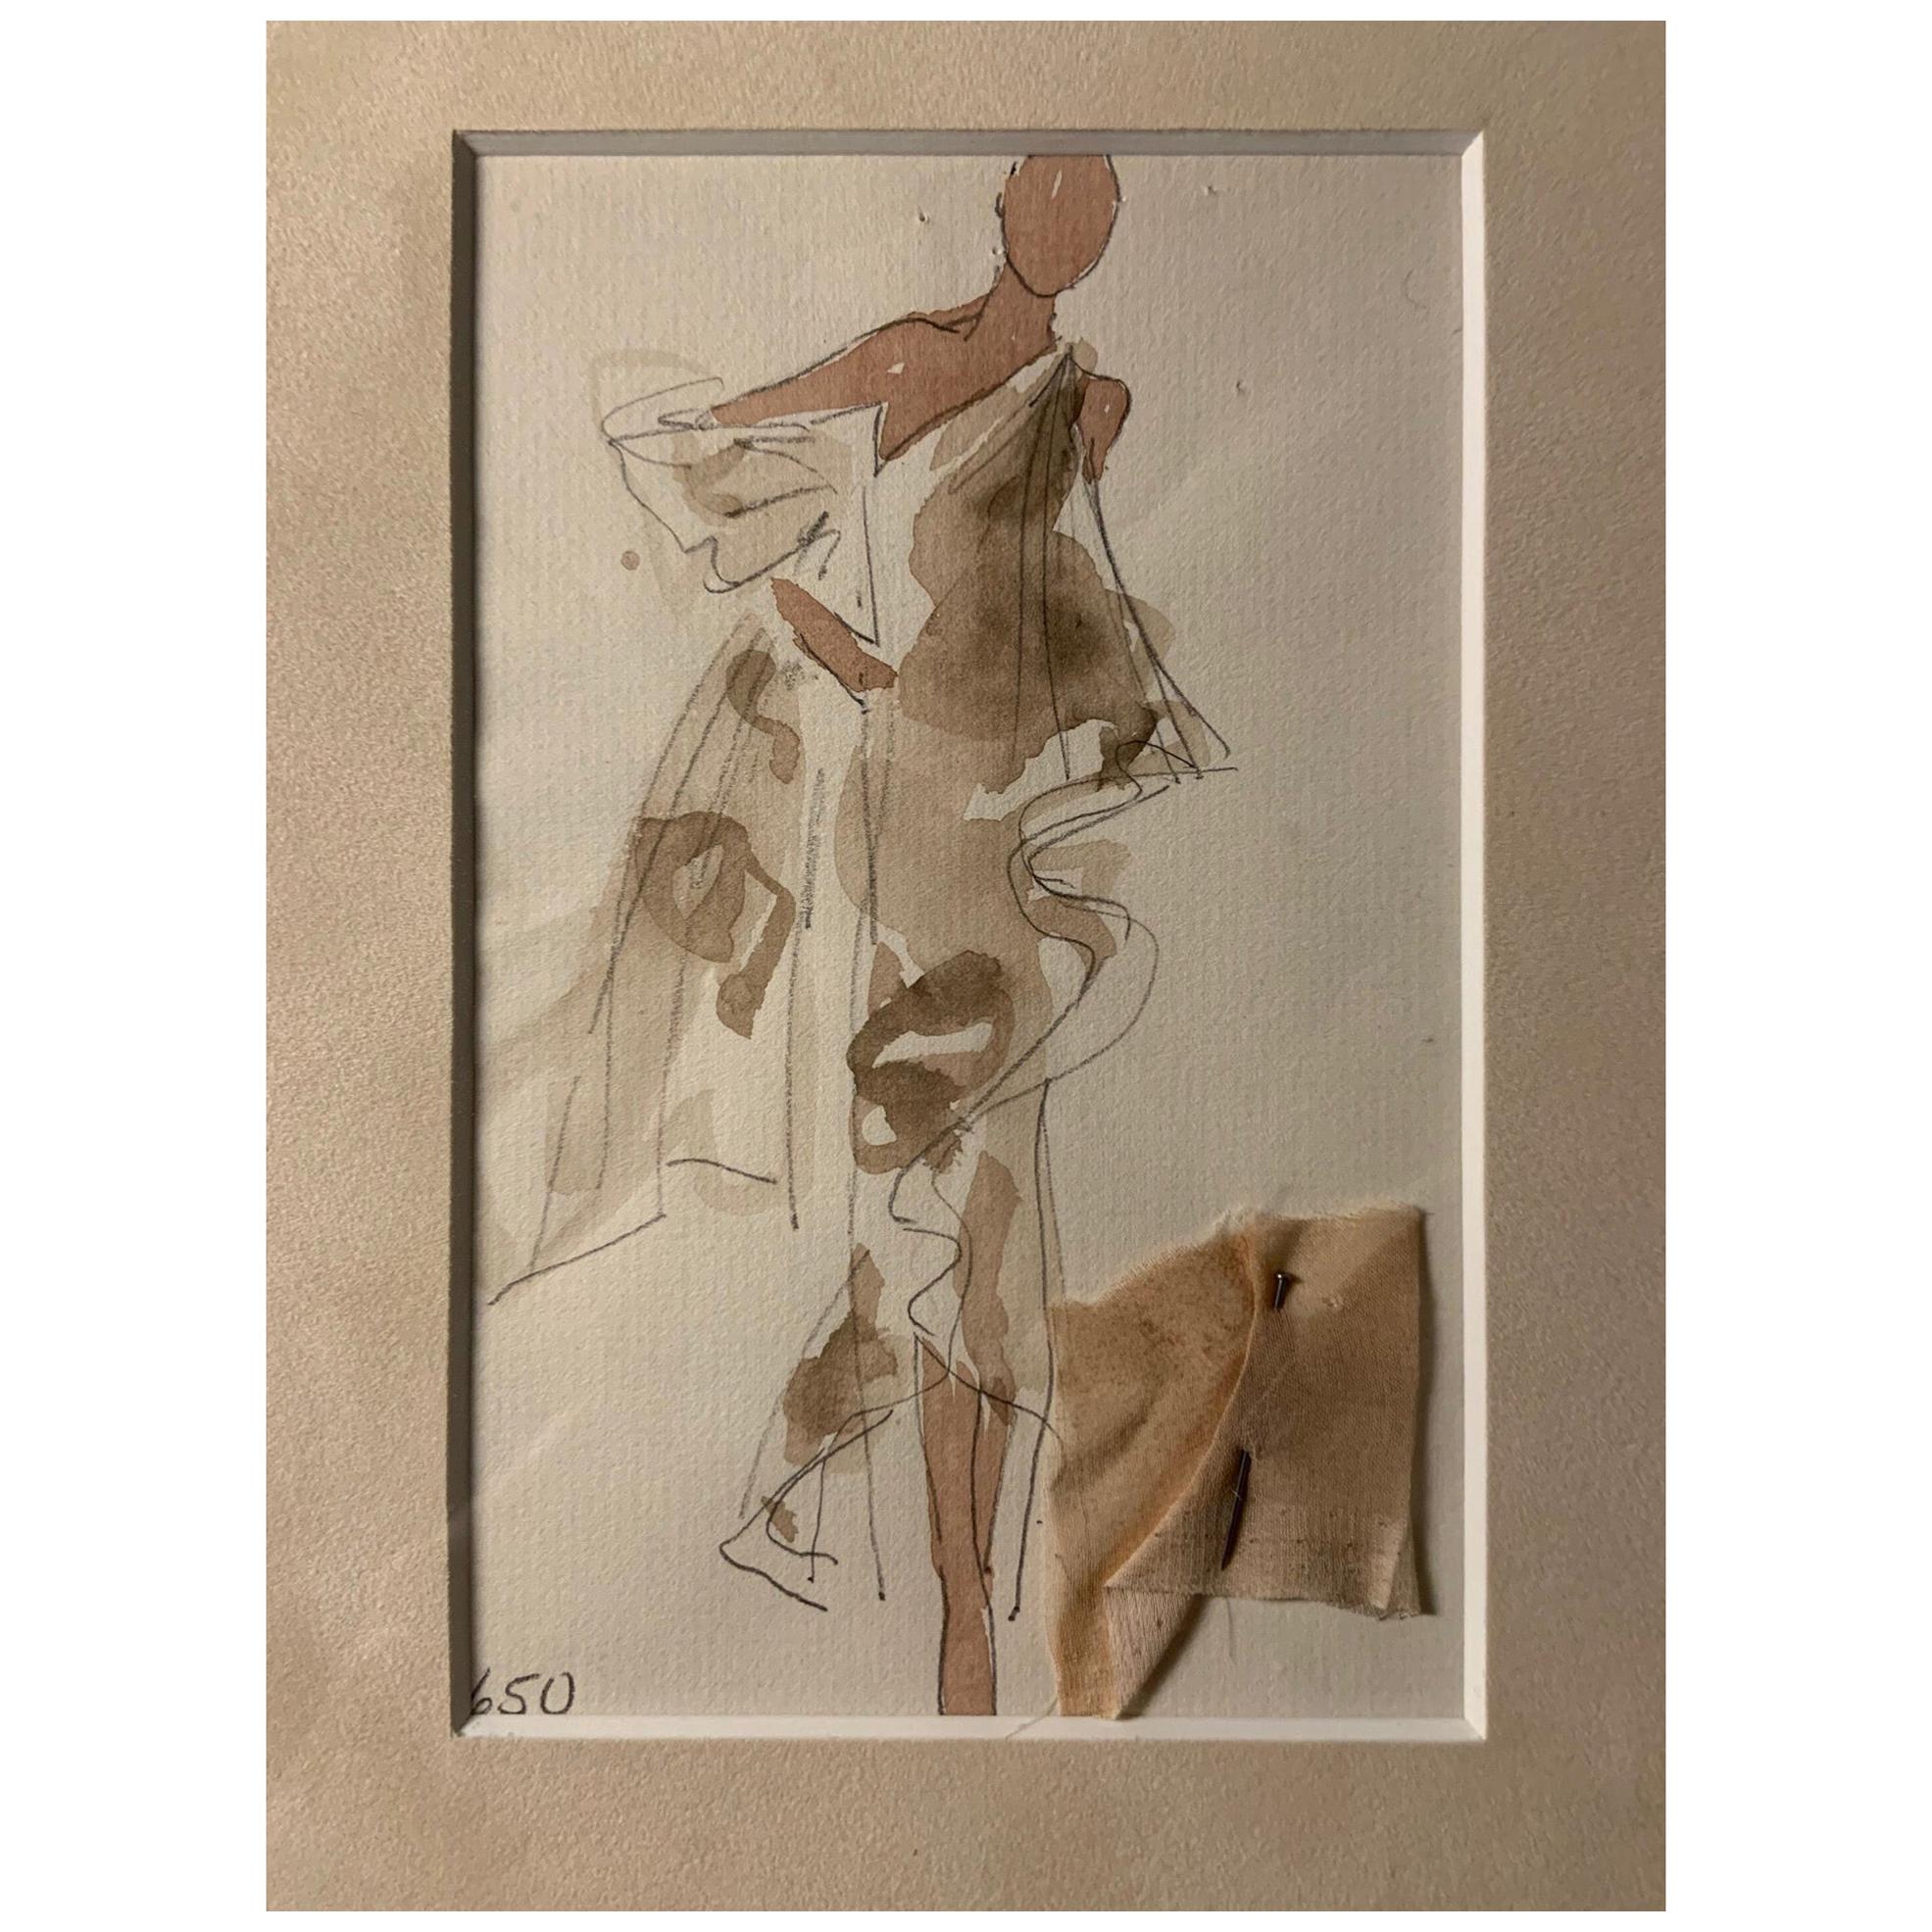 Halston 1970's Evening Gown Fashion Illustration by Joe Eula with Fabric Swatch